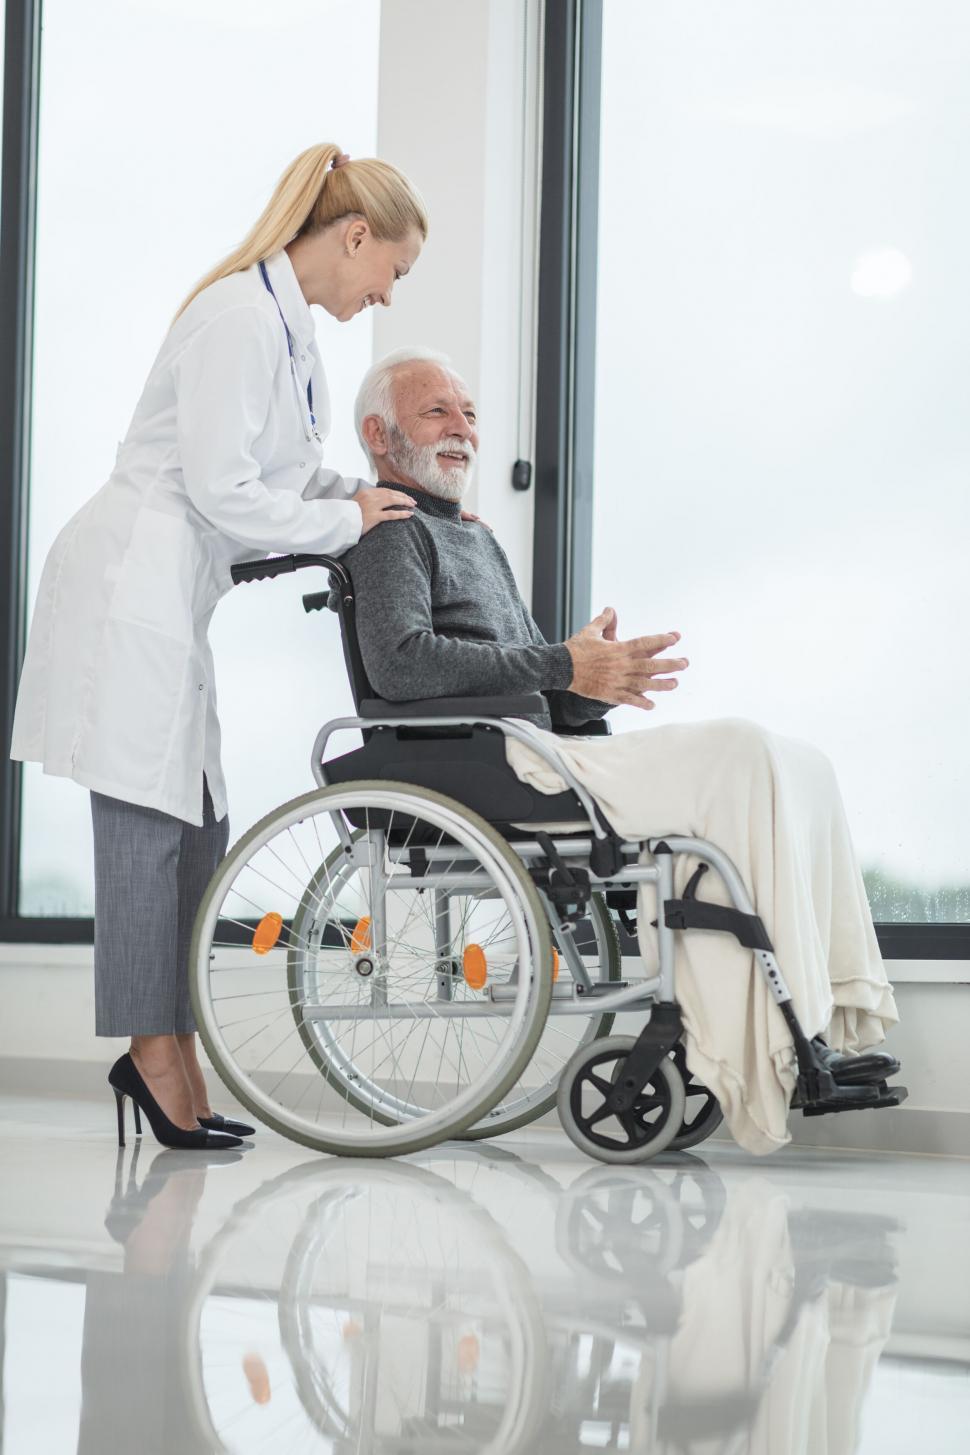 Free Image of Caring nurse comforting a senior patient 